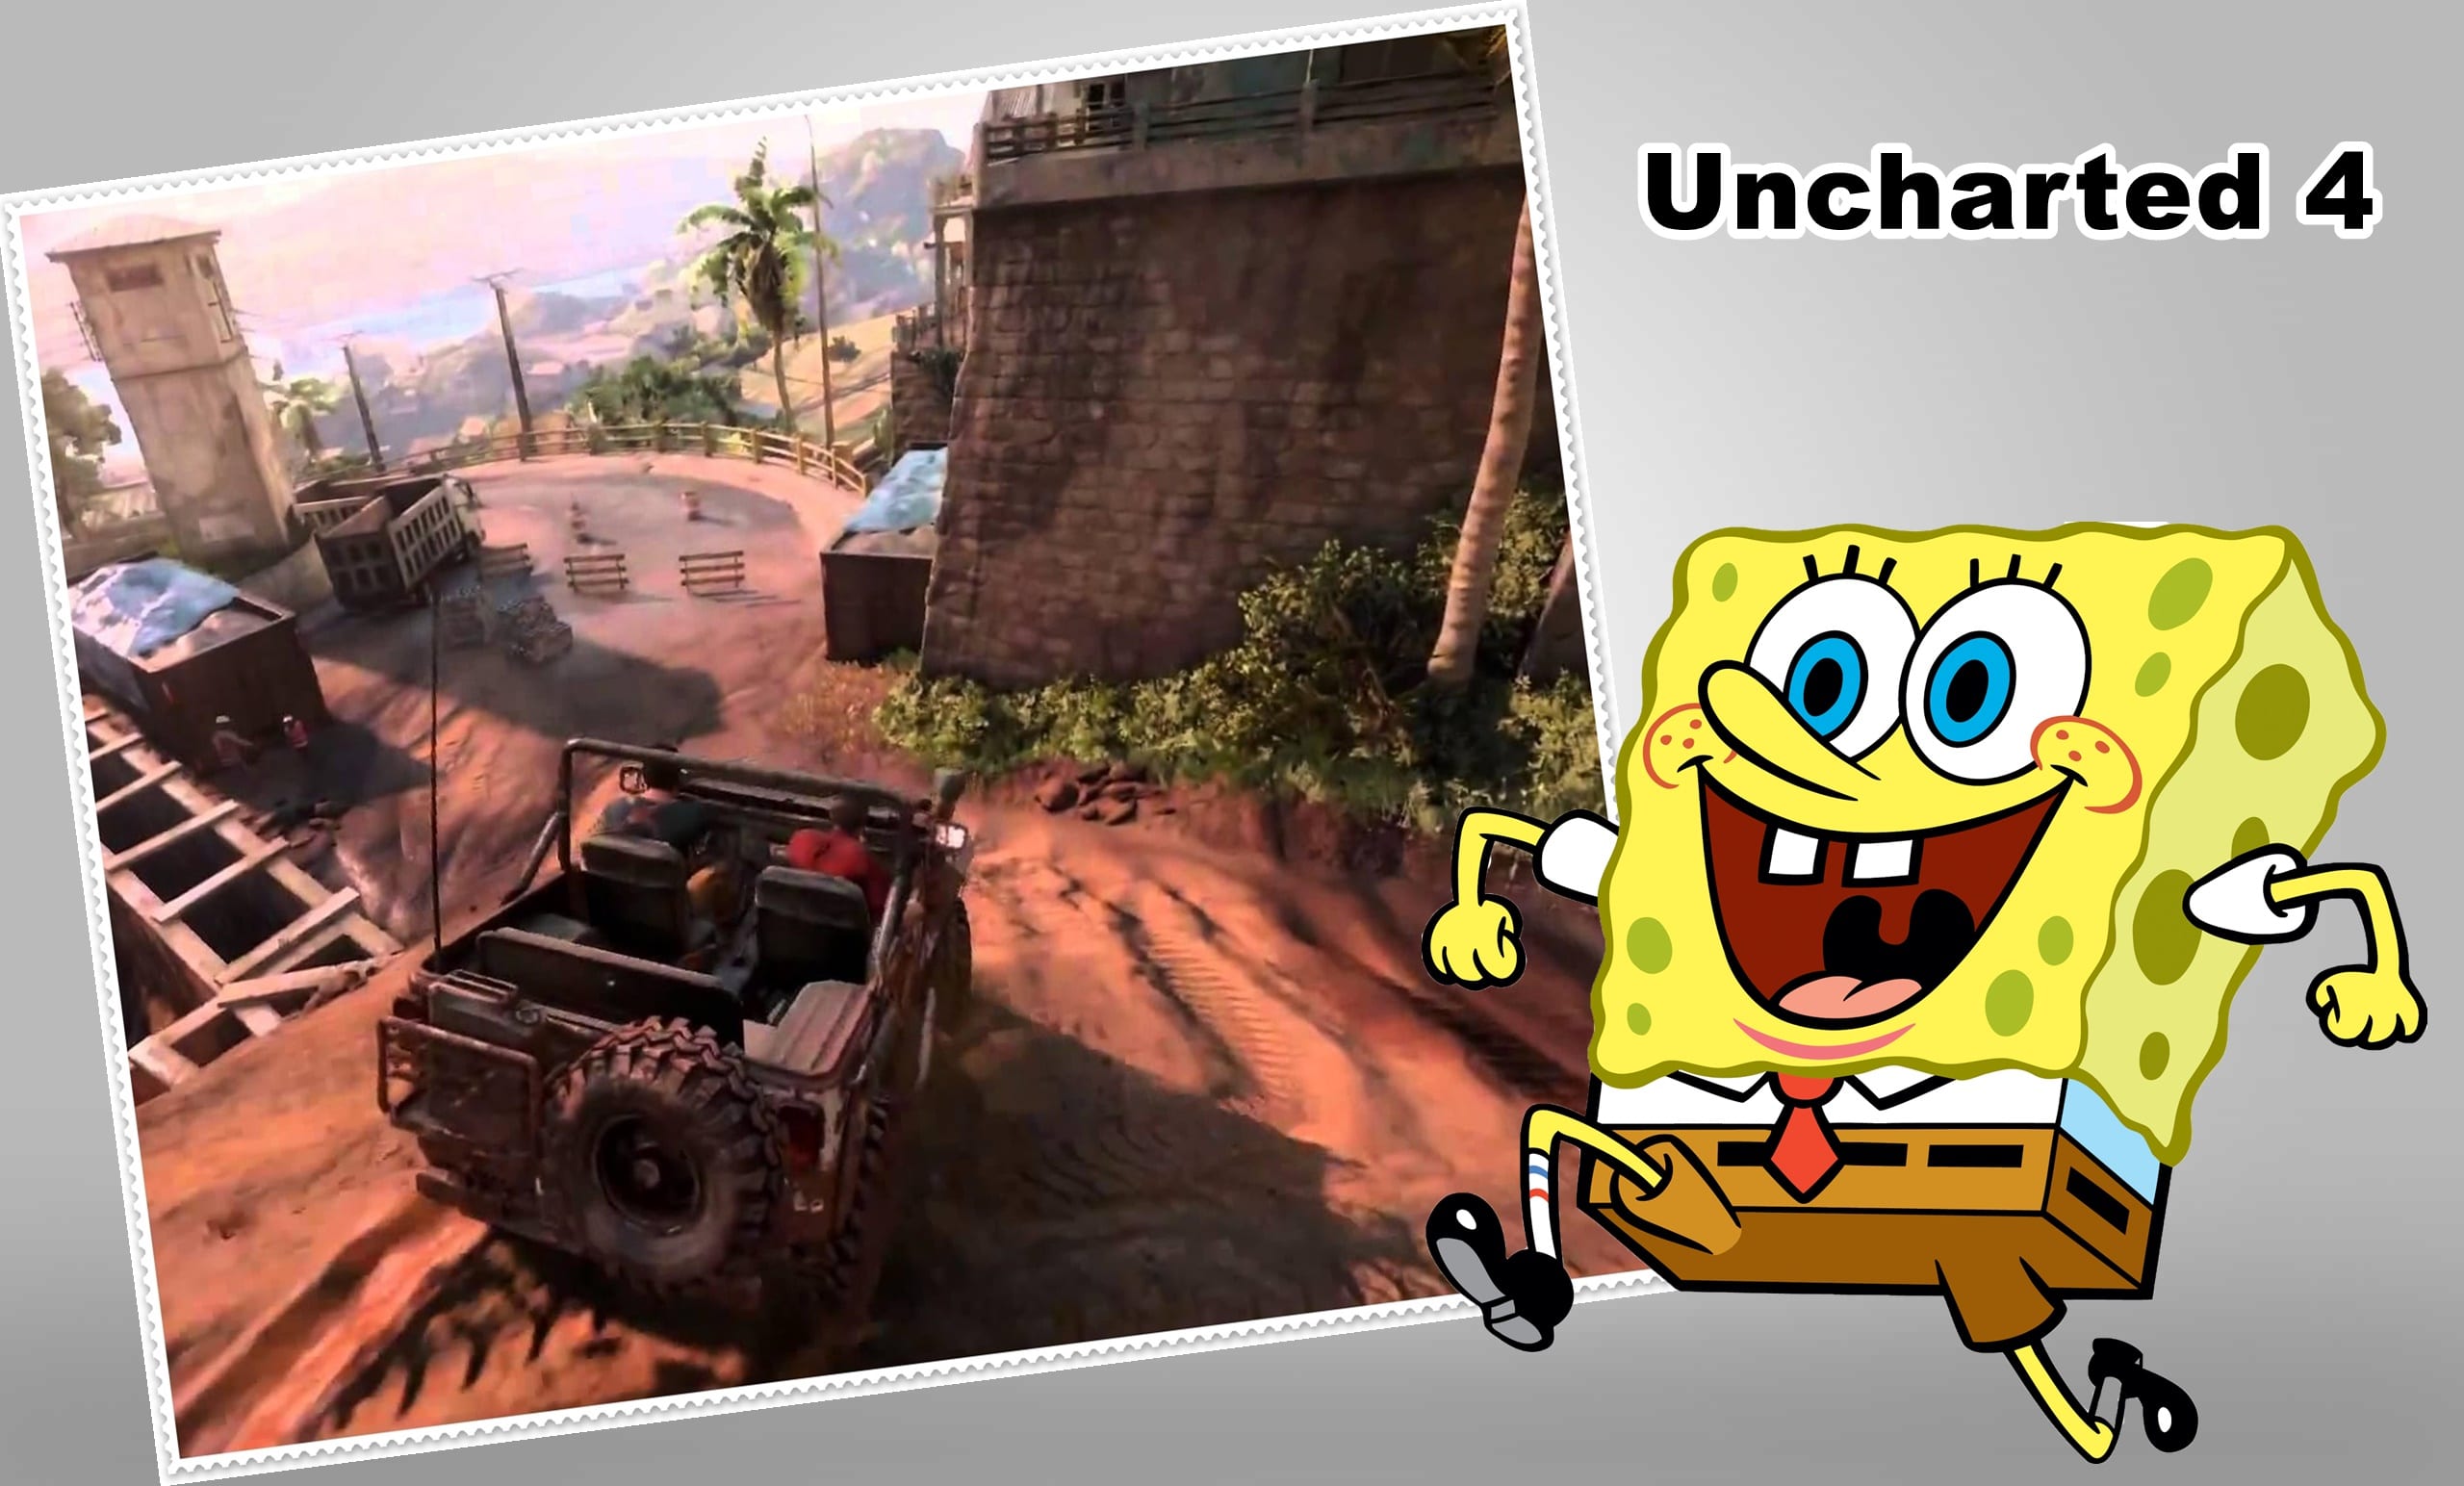 Uncharted 4 Apk Obb Download For Android